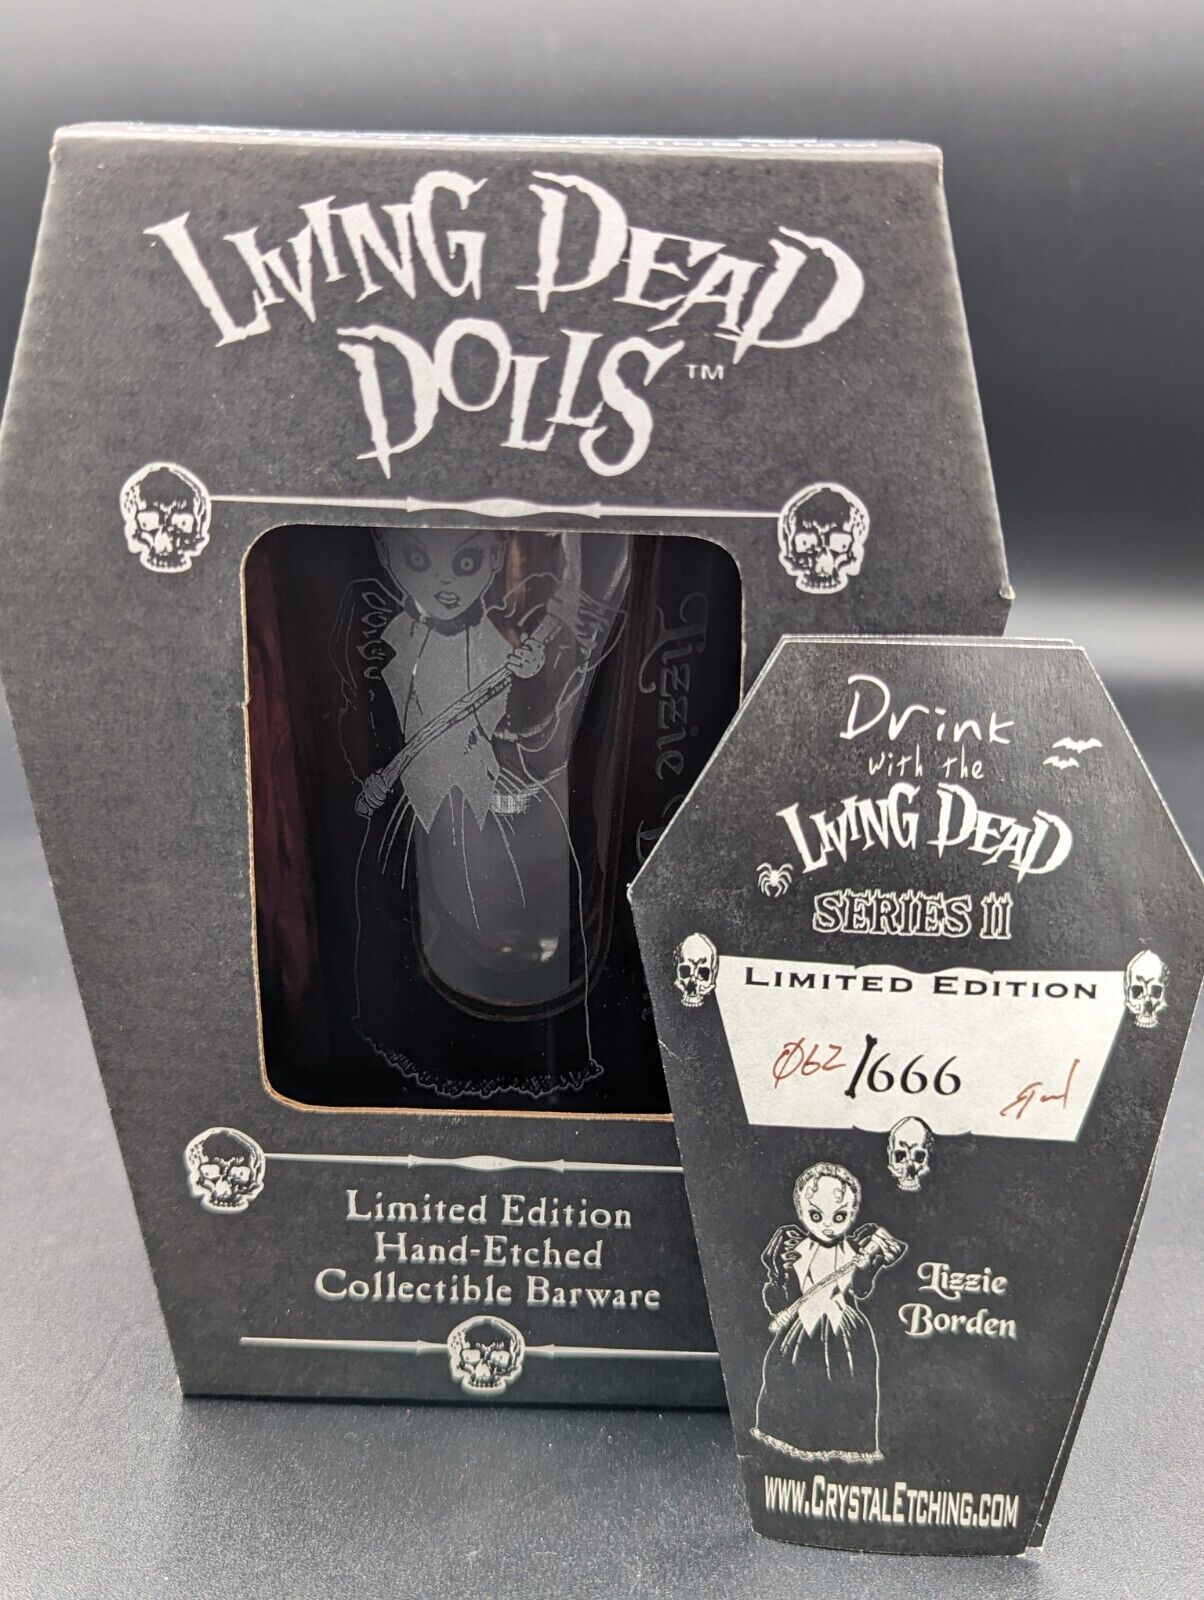 LIVING DEAD DOLLS LIMITED 062/666 HAND-ETCHED COLLECTIBLE BARWARE Lizzie Borden 